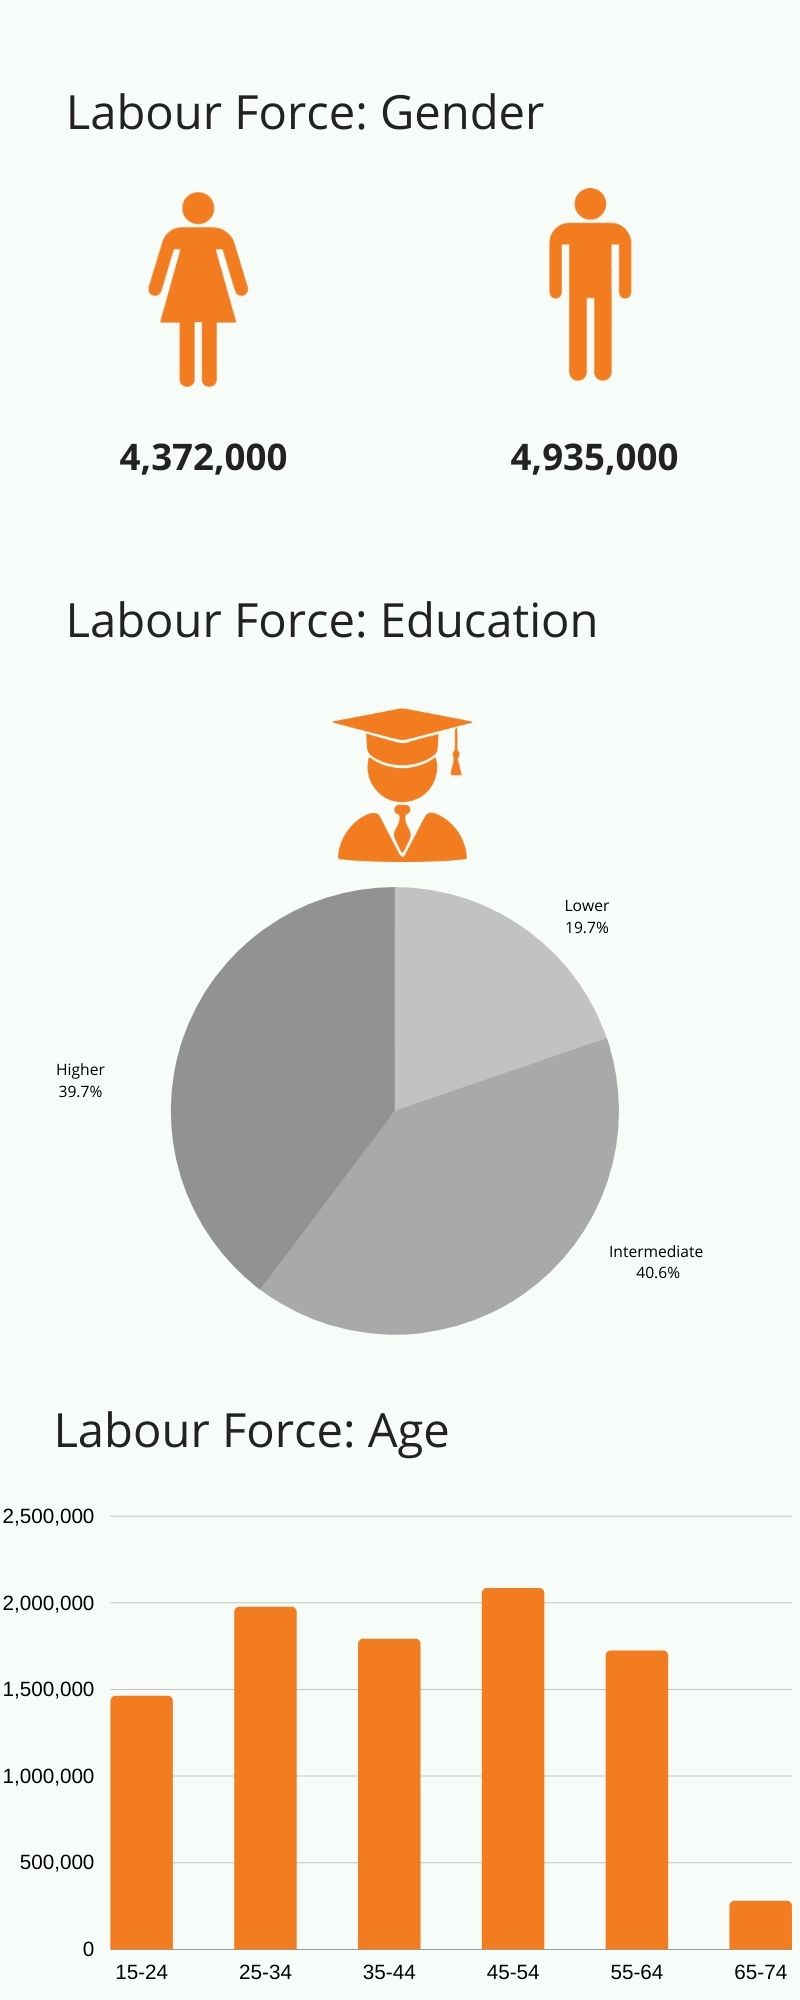 Labour market information according to age, education, gender